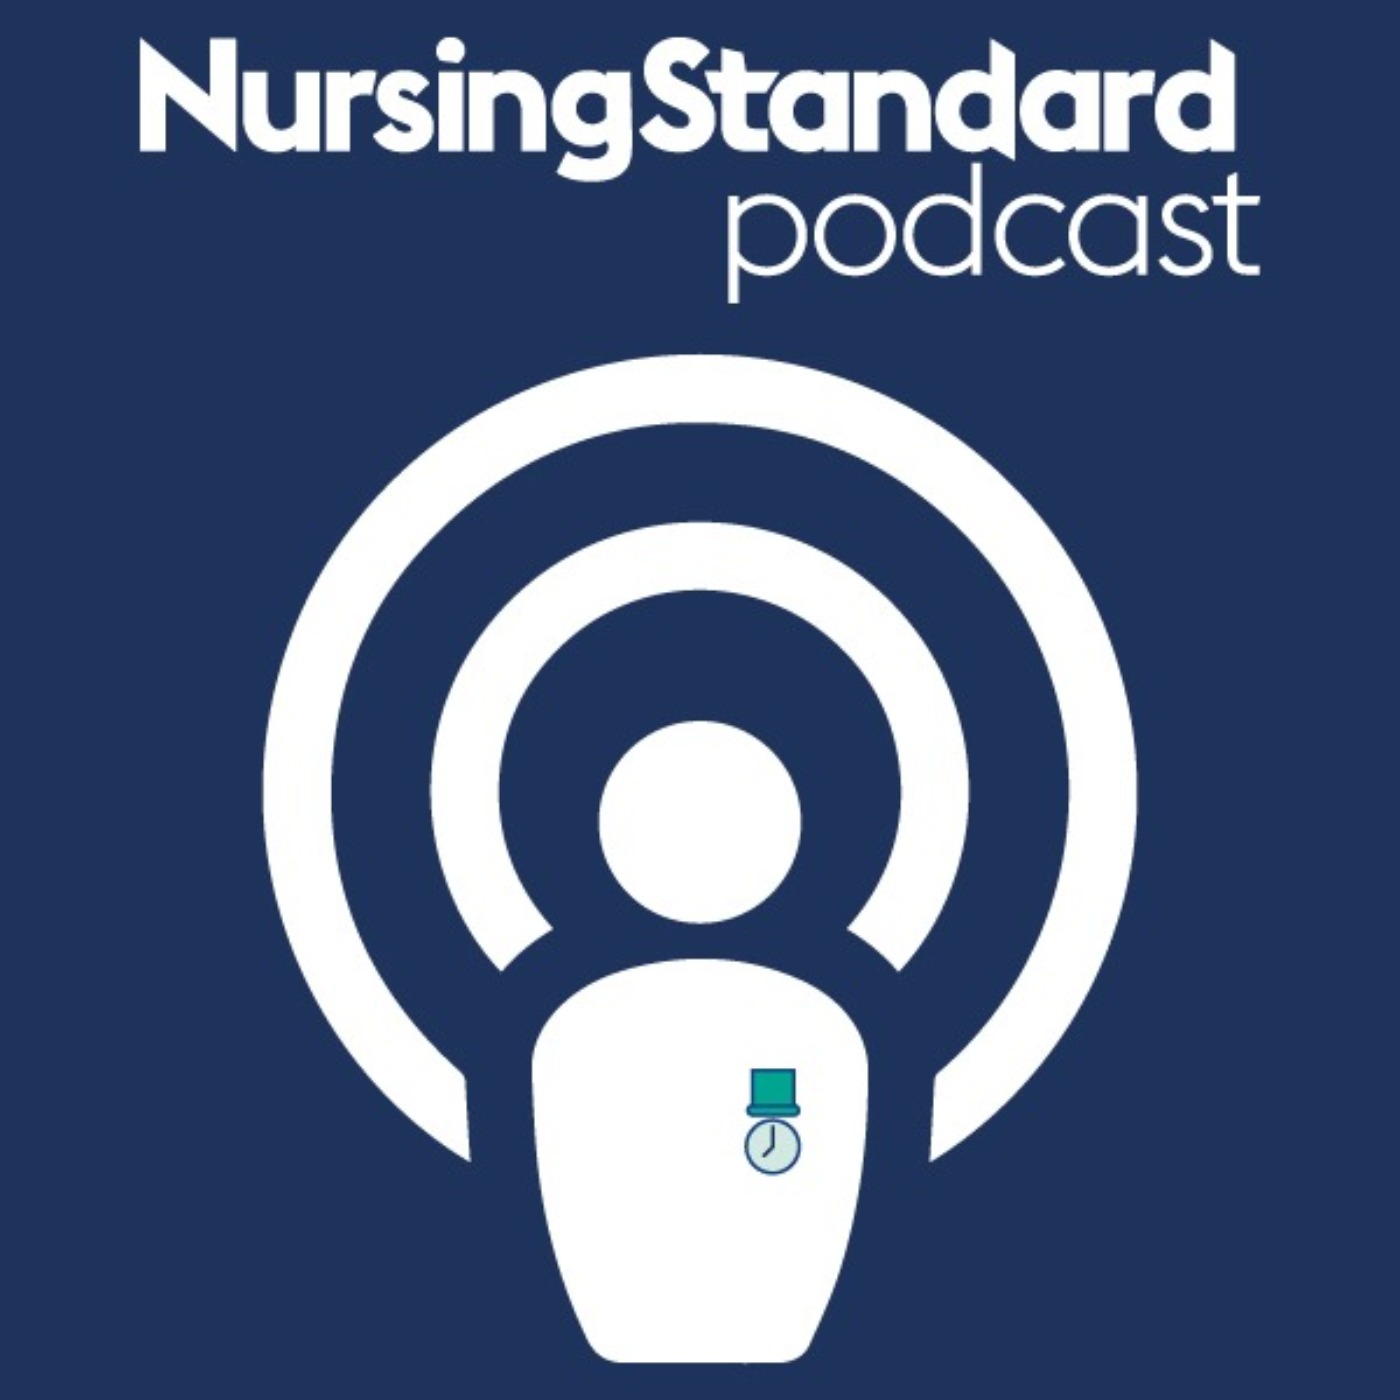 Maintaining wellbeing for nurses